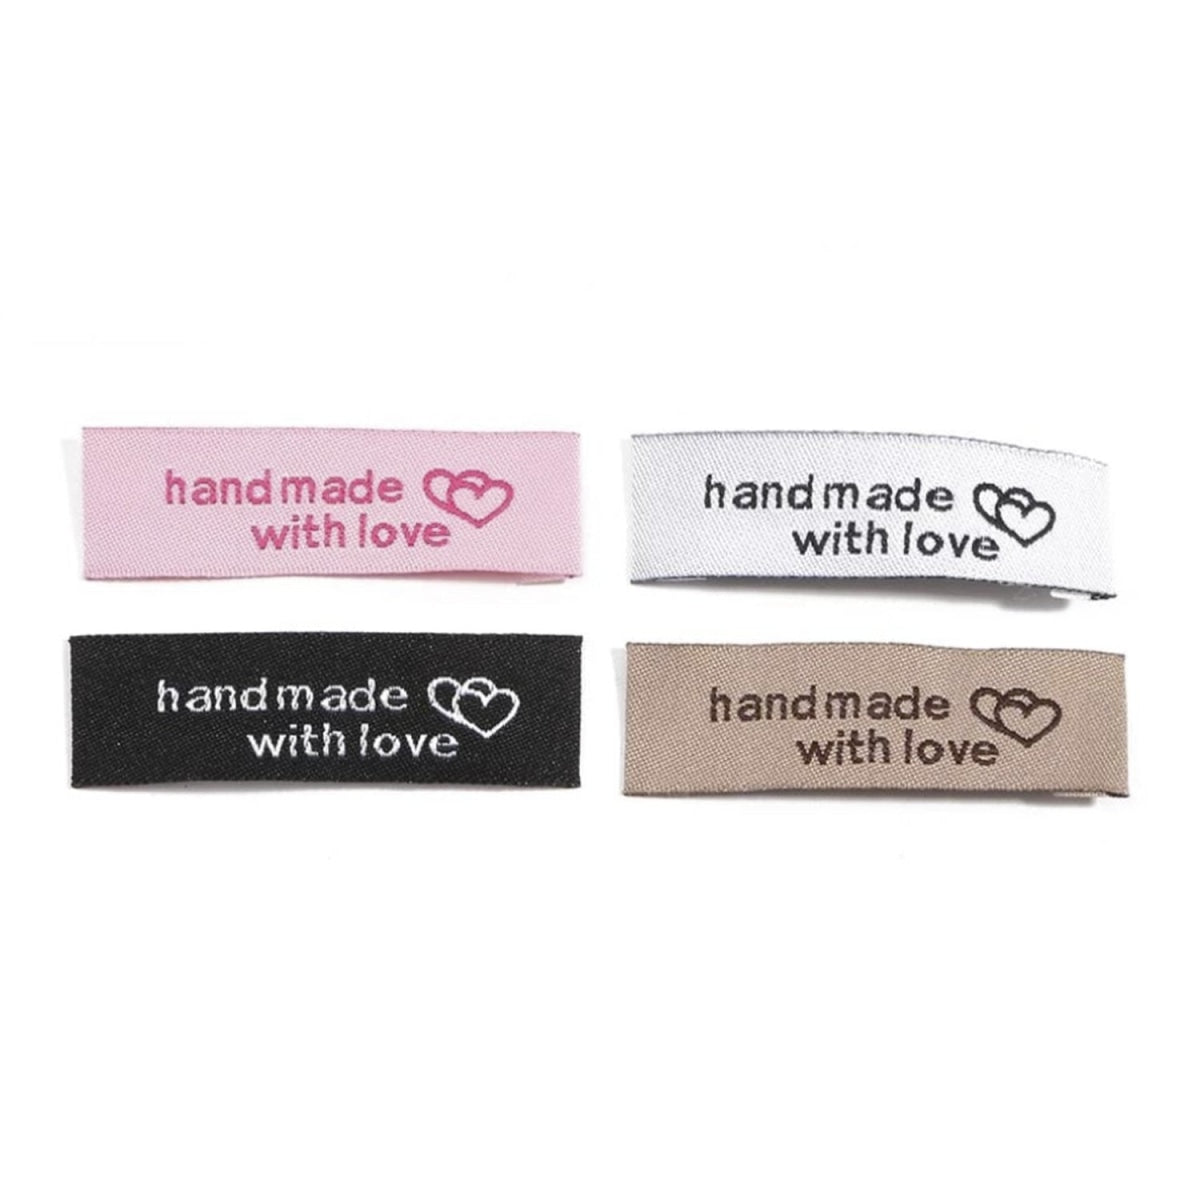 100pcs Sewing Tags Clothing Labels Cloth Fabric "Handmade with Love" Bags DIY - Mixed - Asia Sell